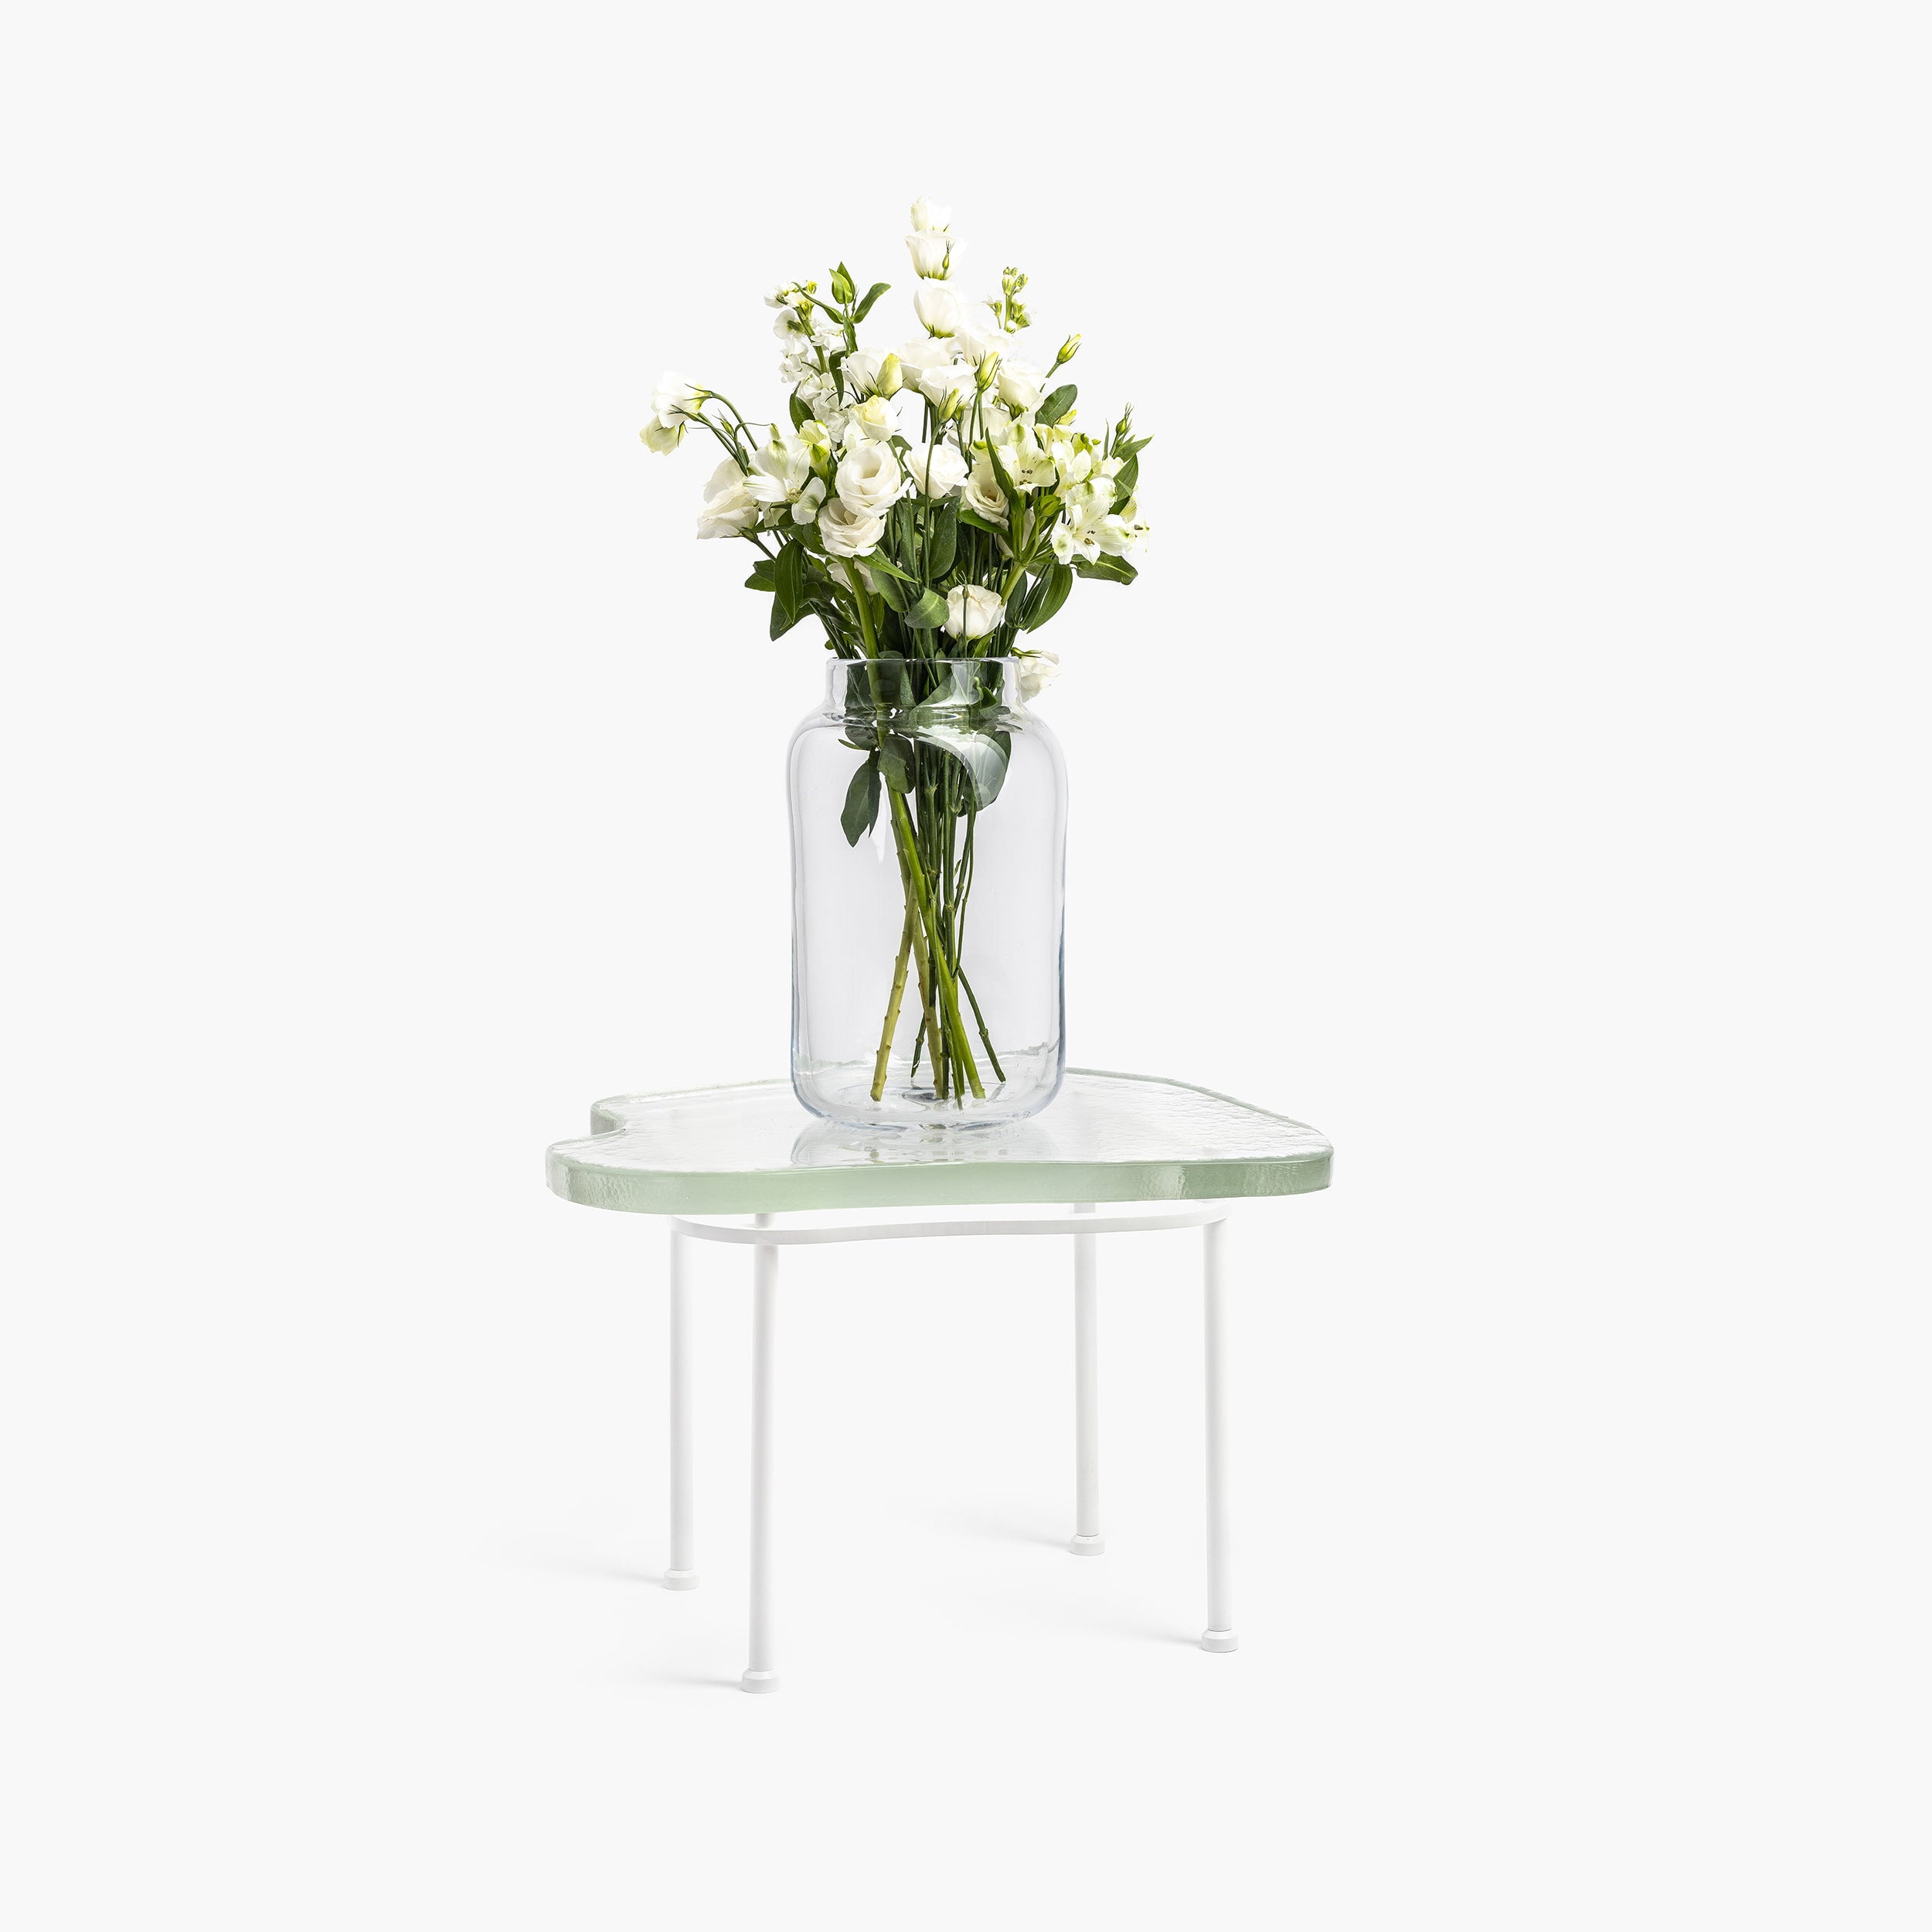 YALI ISOLA SIDE TABLE CLEAR WHITE 